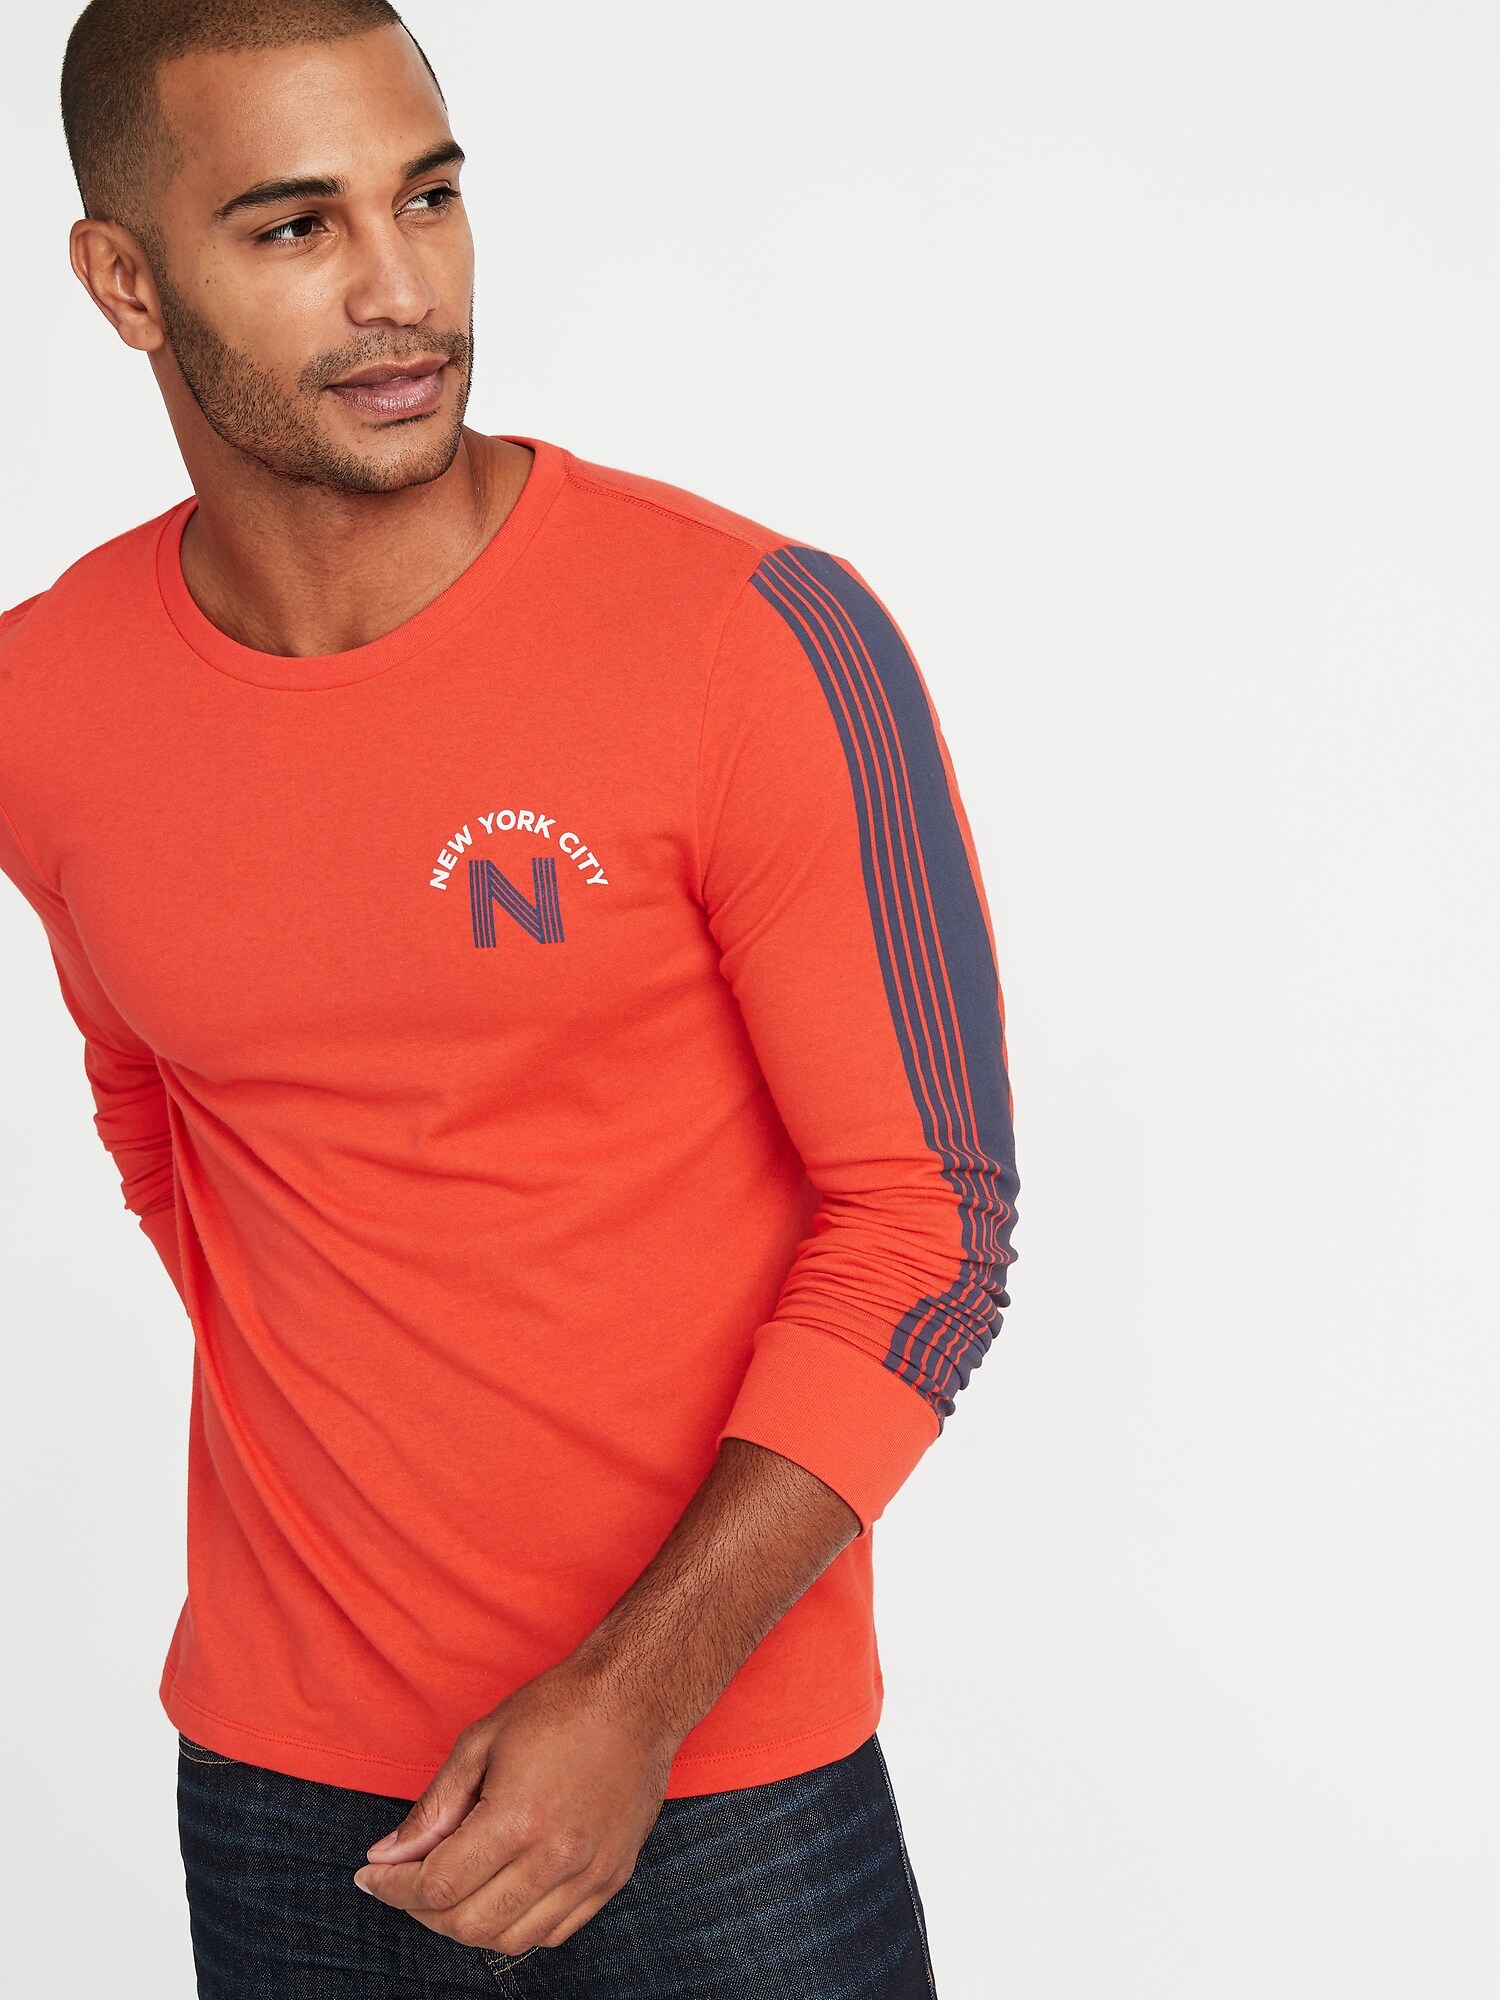 Soft-Washed Long-Sleeve Graphic Tee for Men | Old Navy